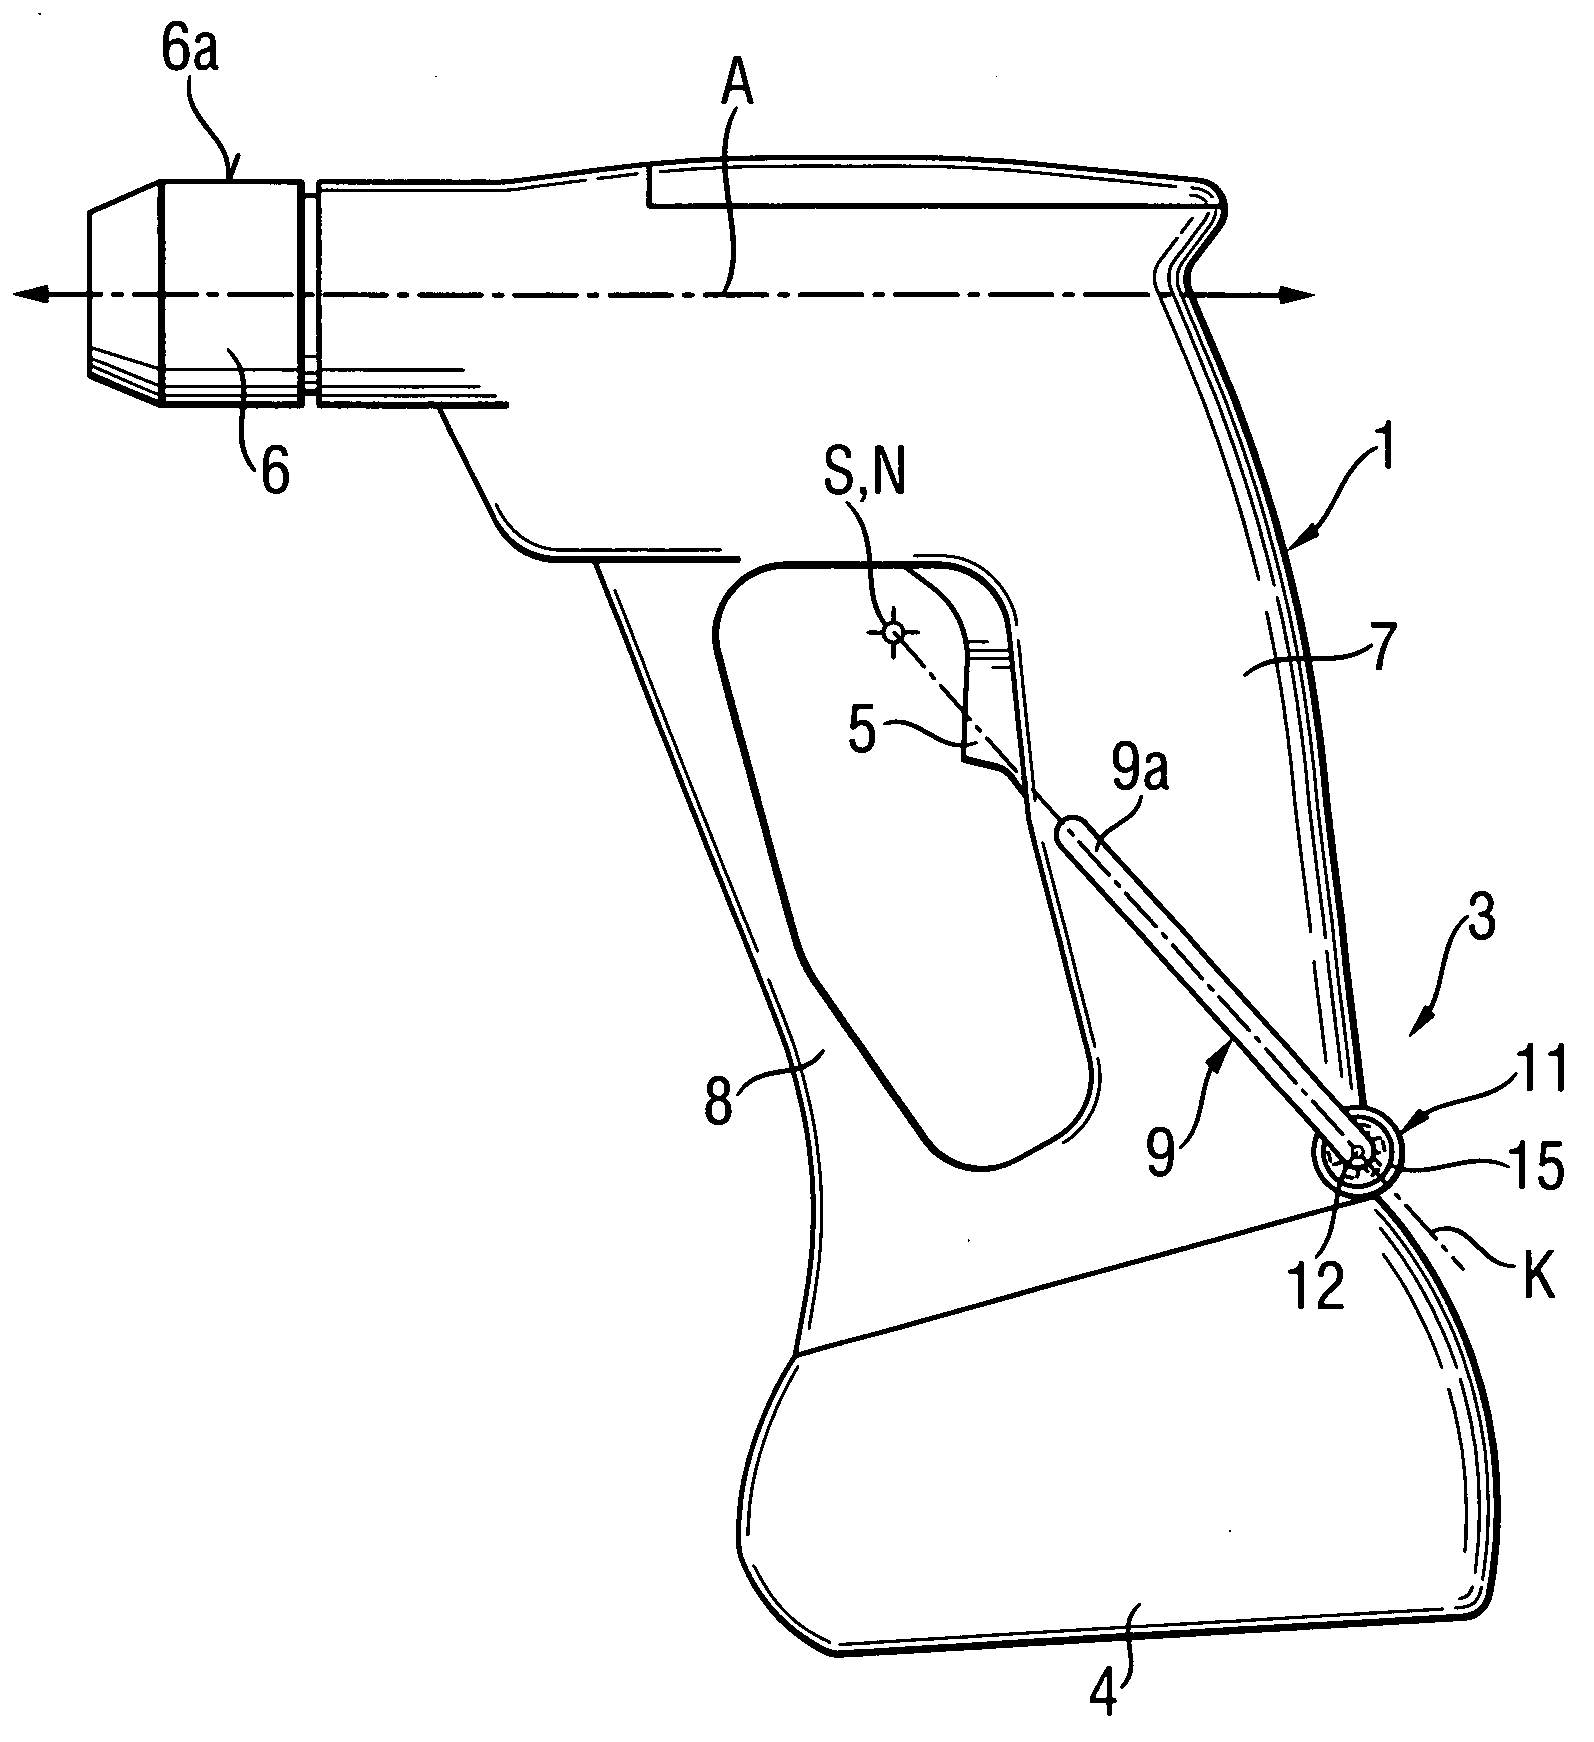 Hand-held power tool with a holding device